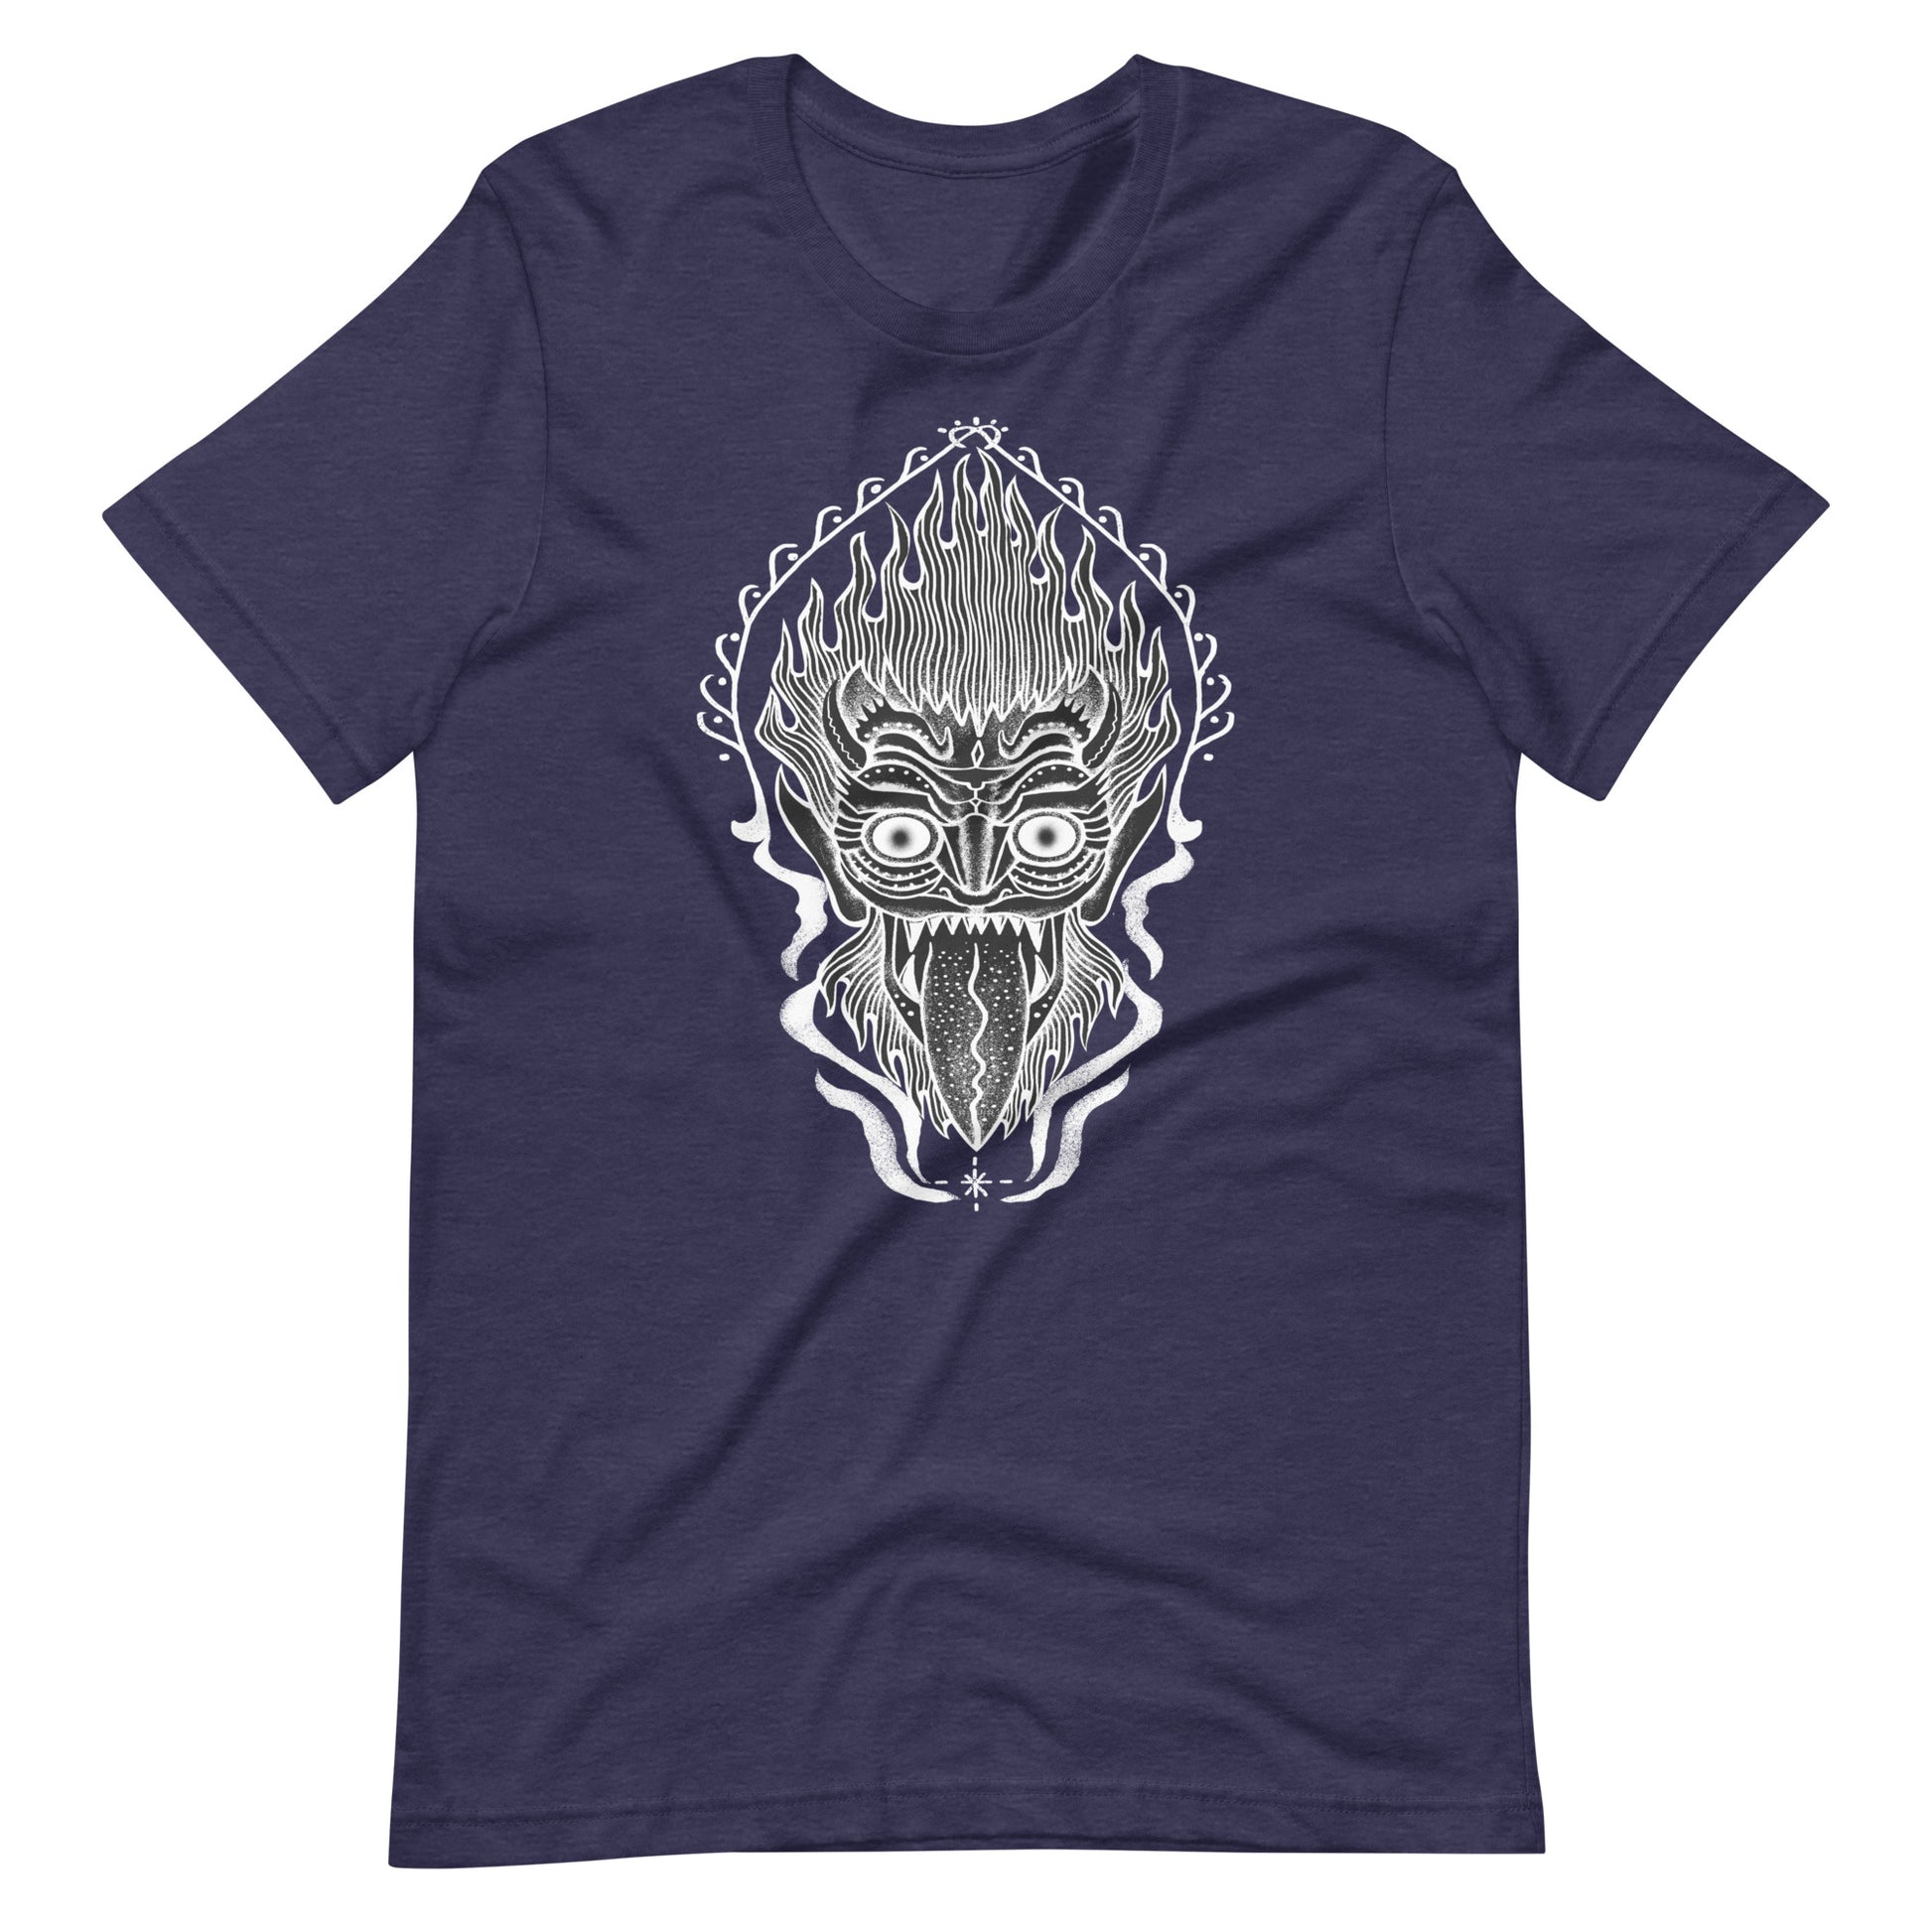 King of Fire - Men's t-shirt - Heather Midnight Navy Front